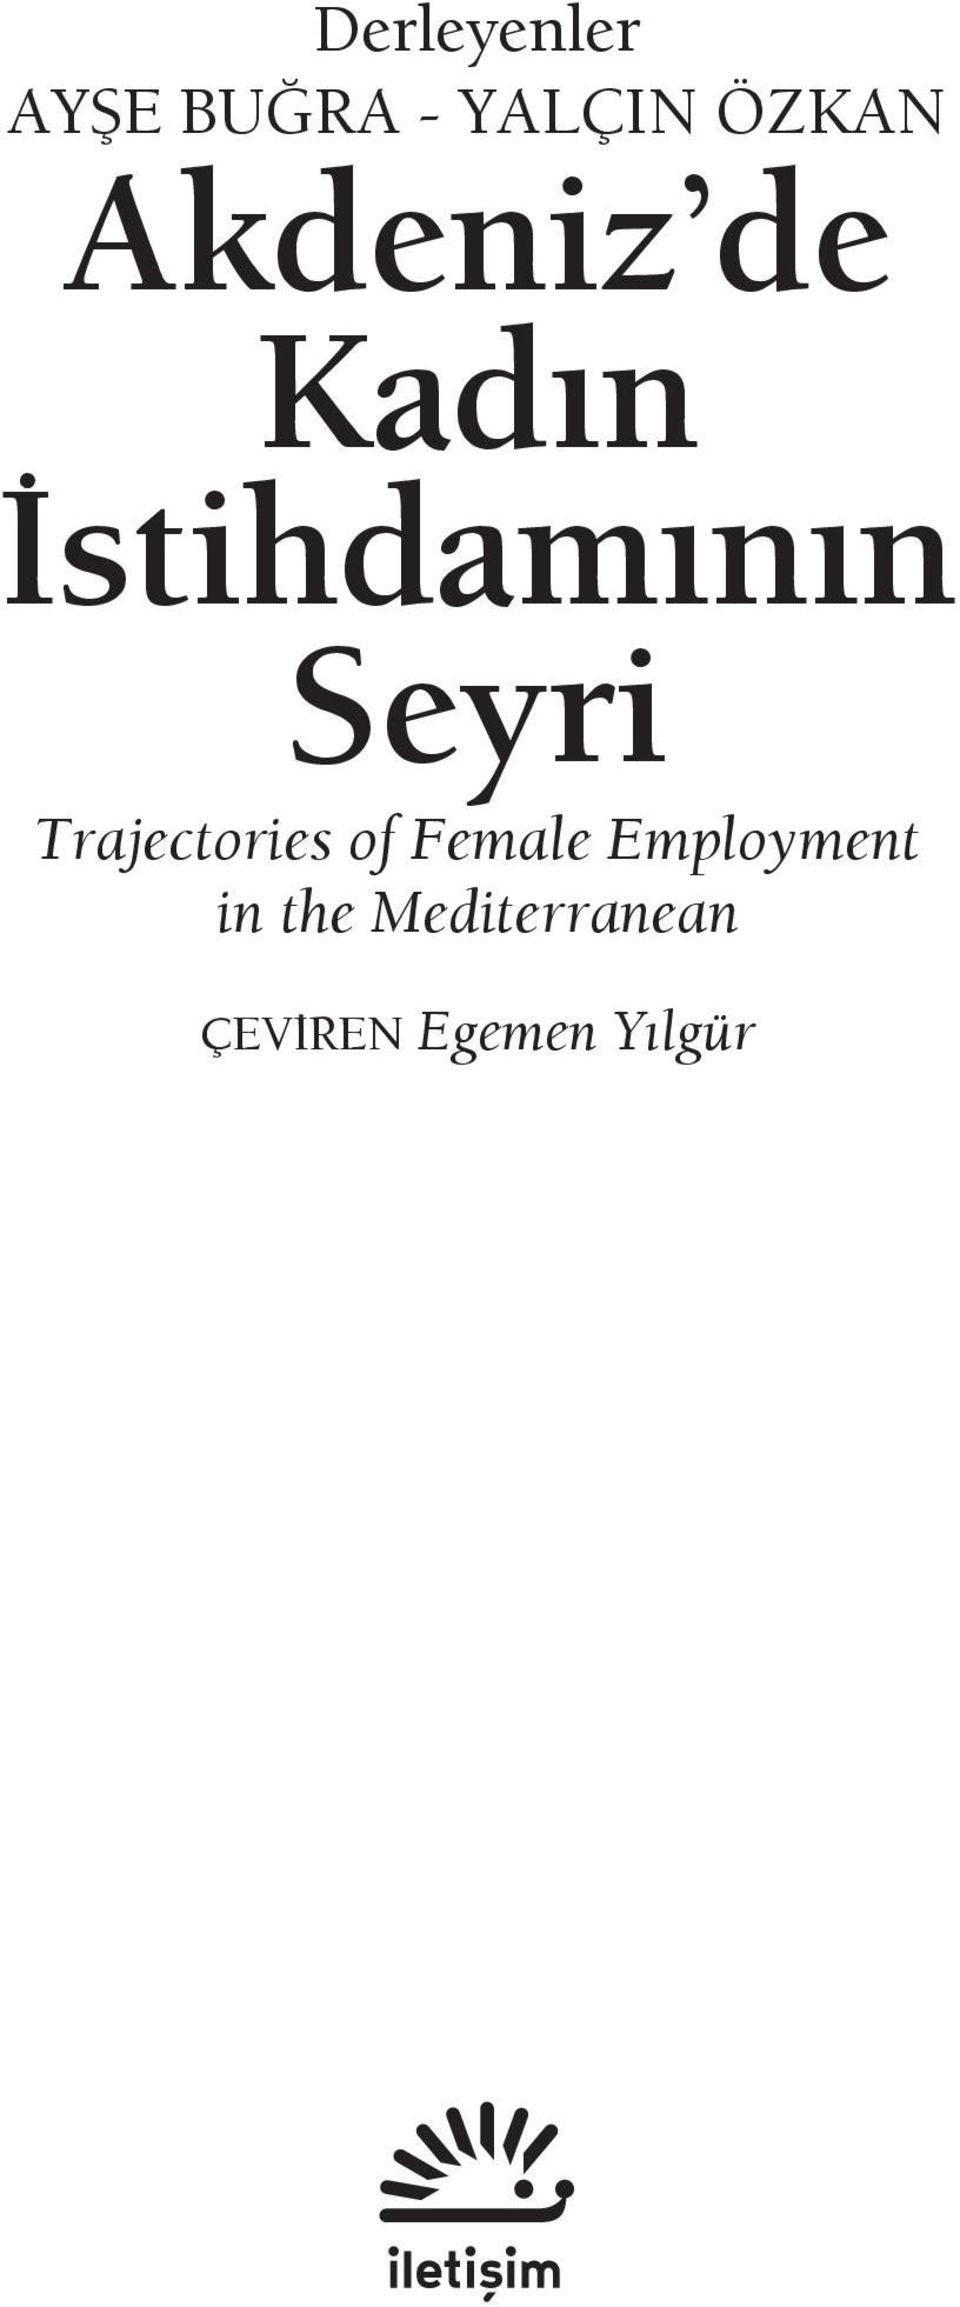 Trajectories of Female Employment in